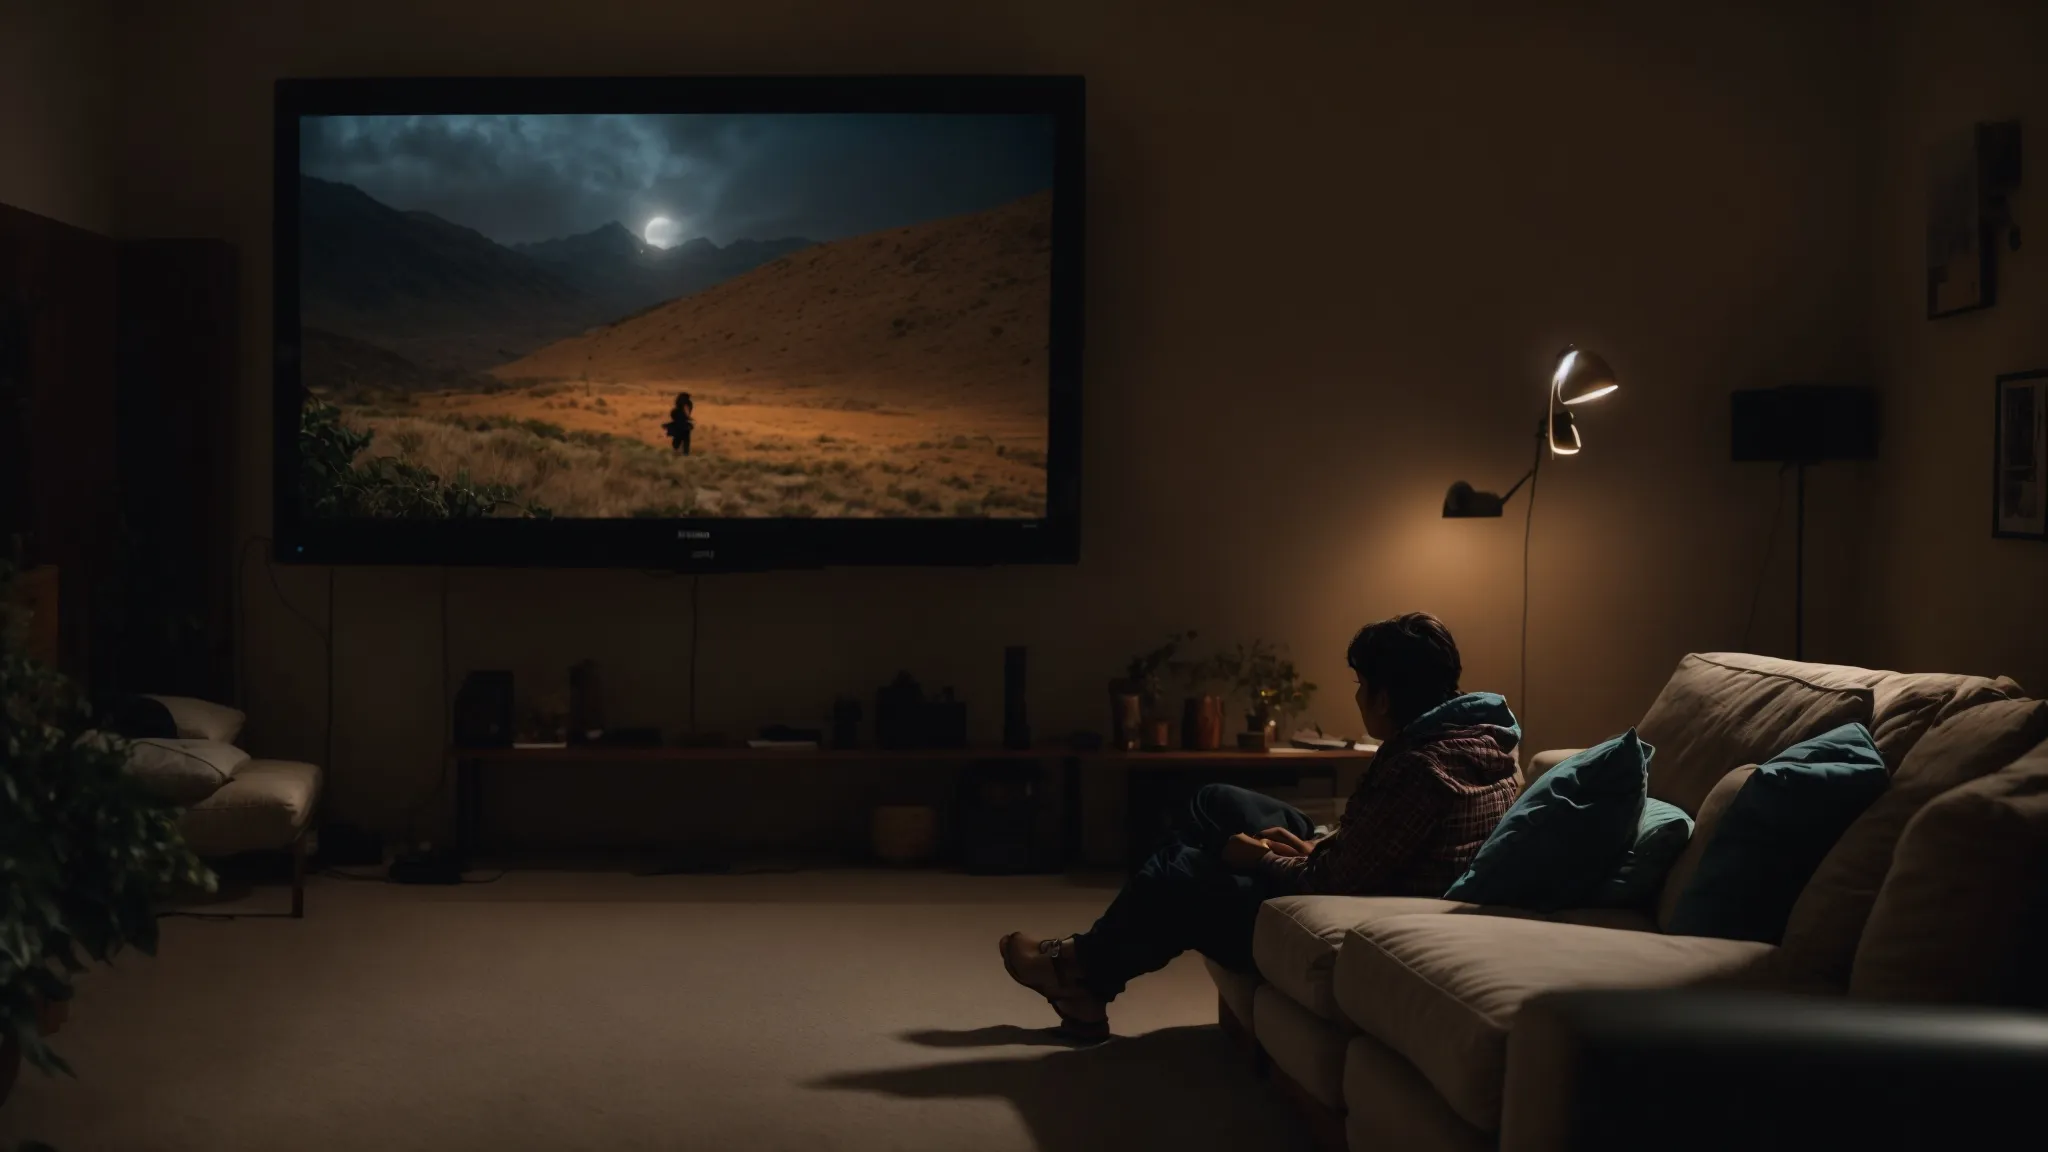 a person sitting comfortably on a couch, gazing at an adventure movie playing on a large screen in a dimly lit room.